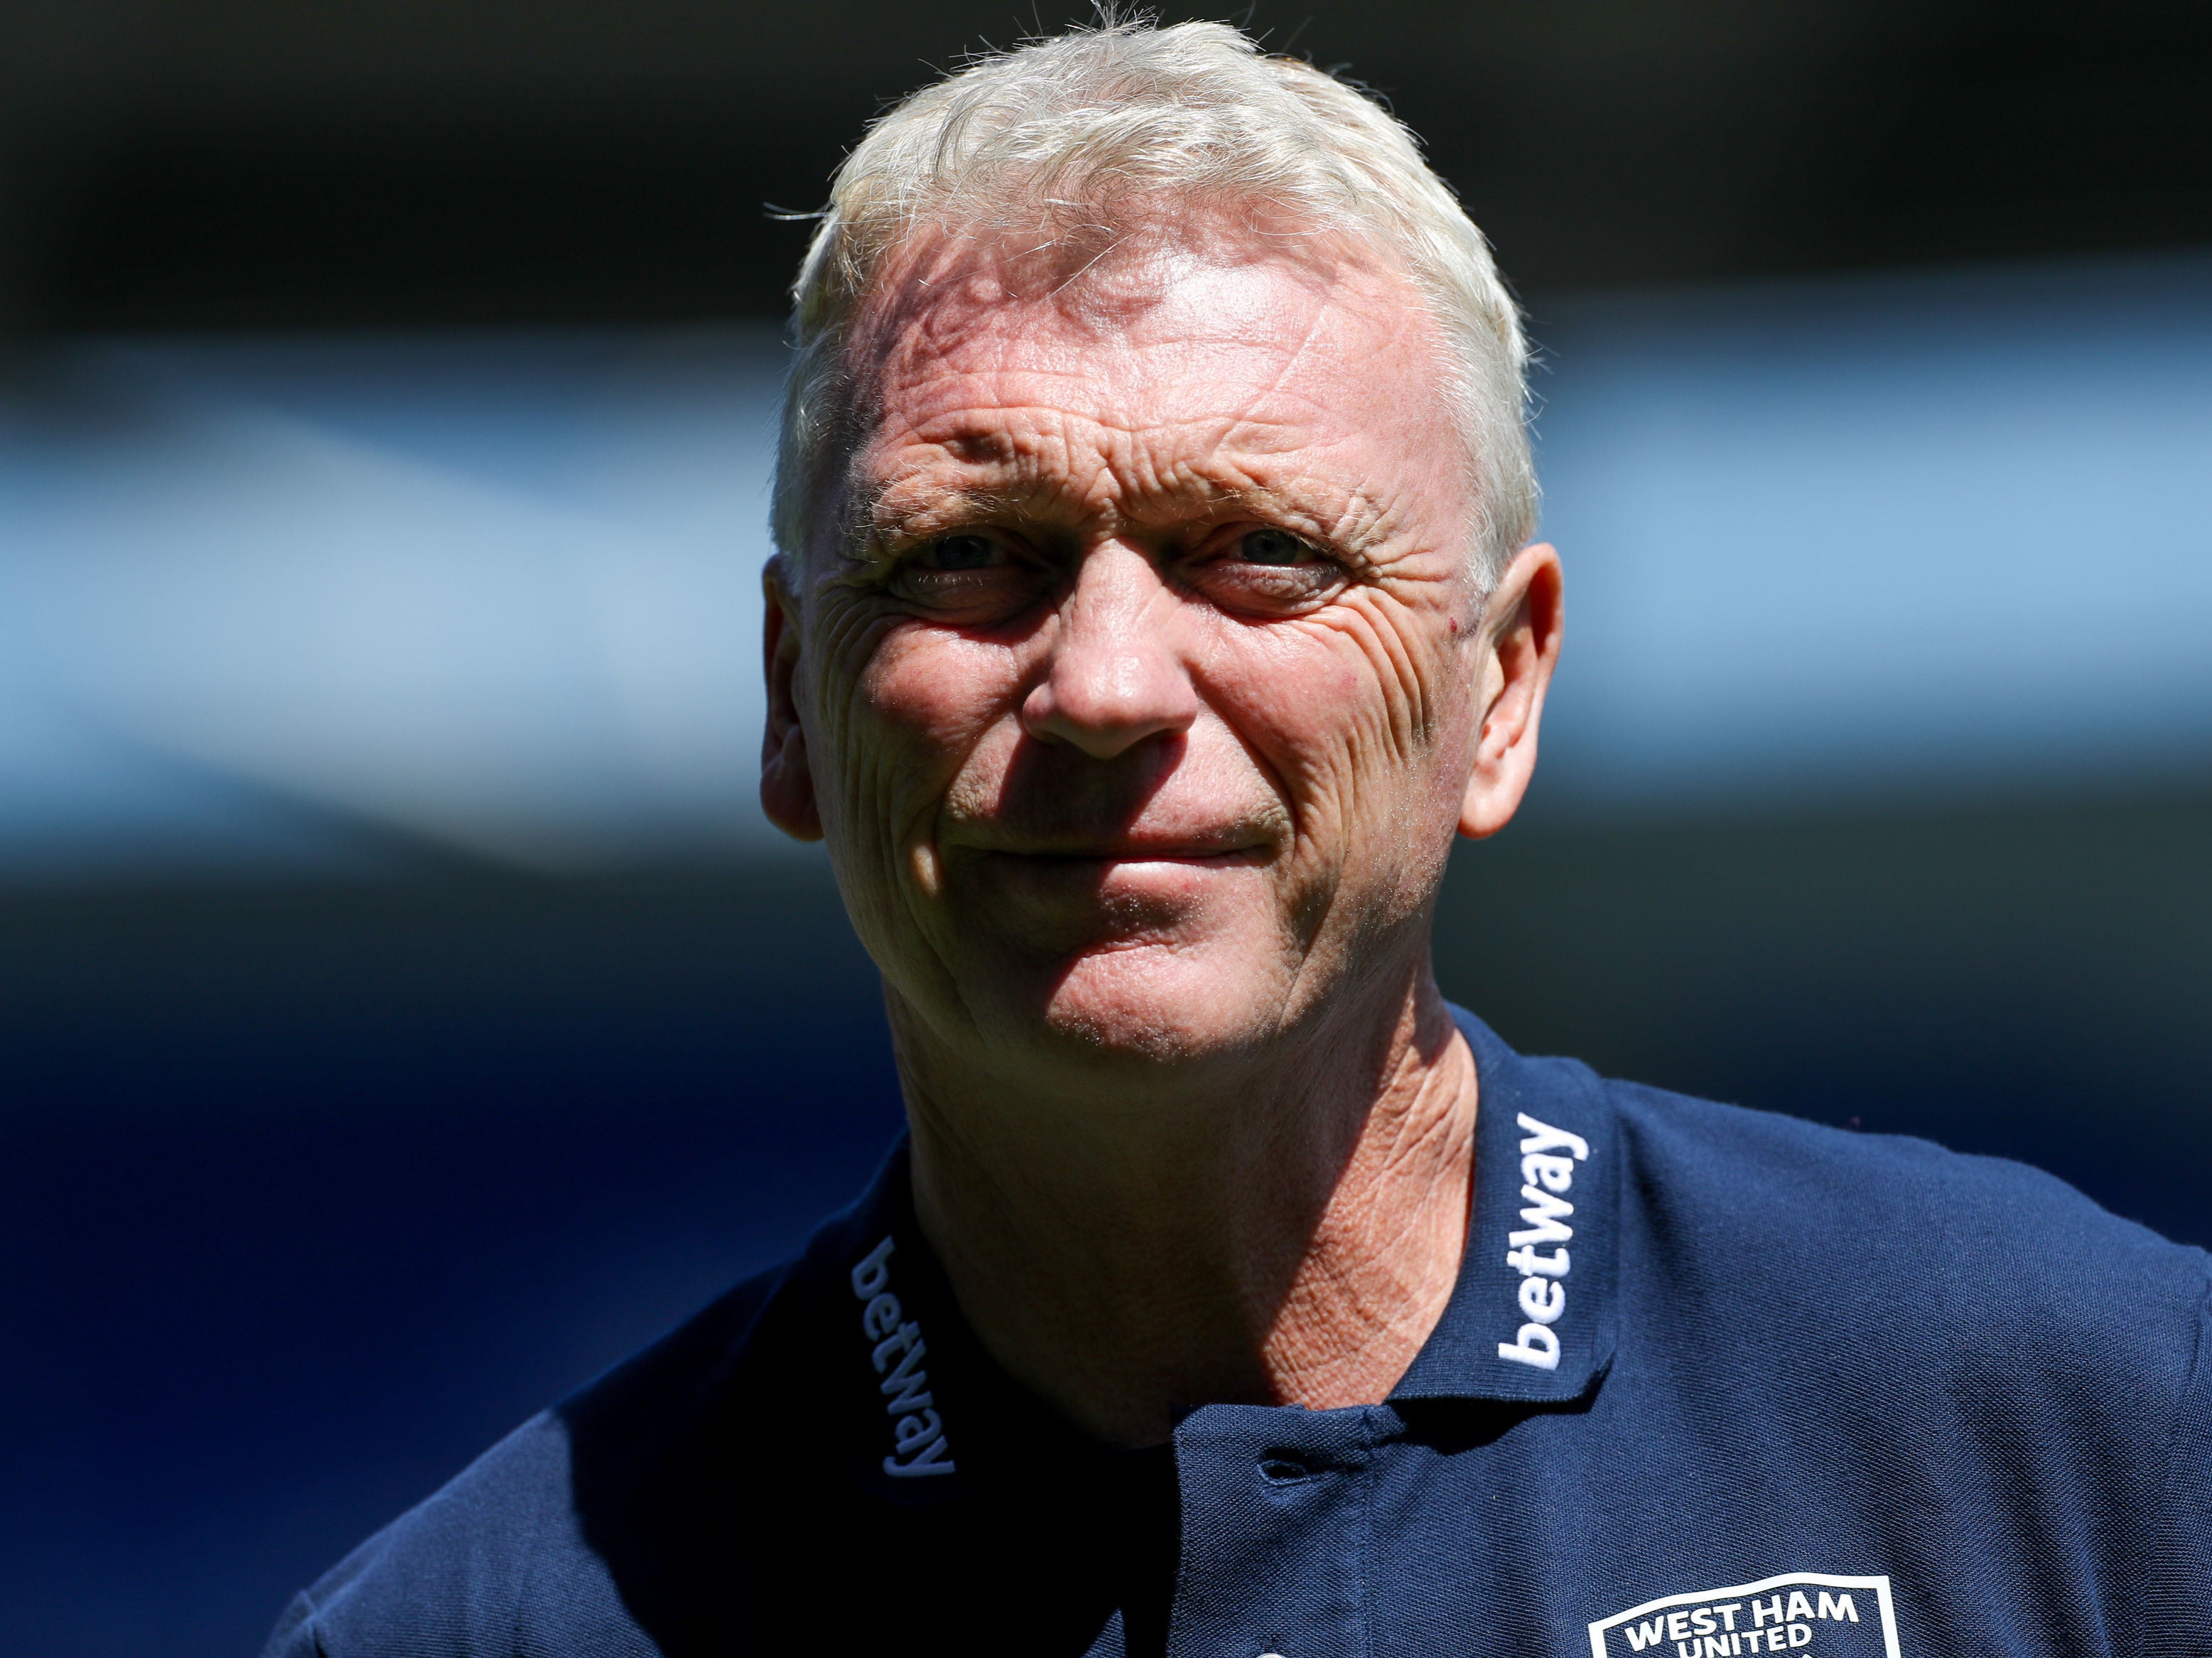 Moyes once again wants to add a marquee signing to his West Ham squad